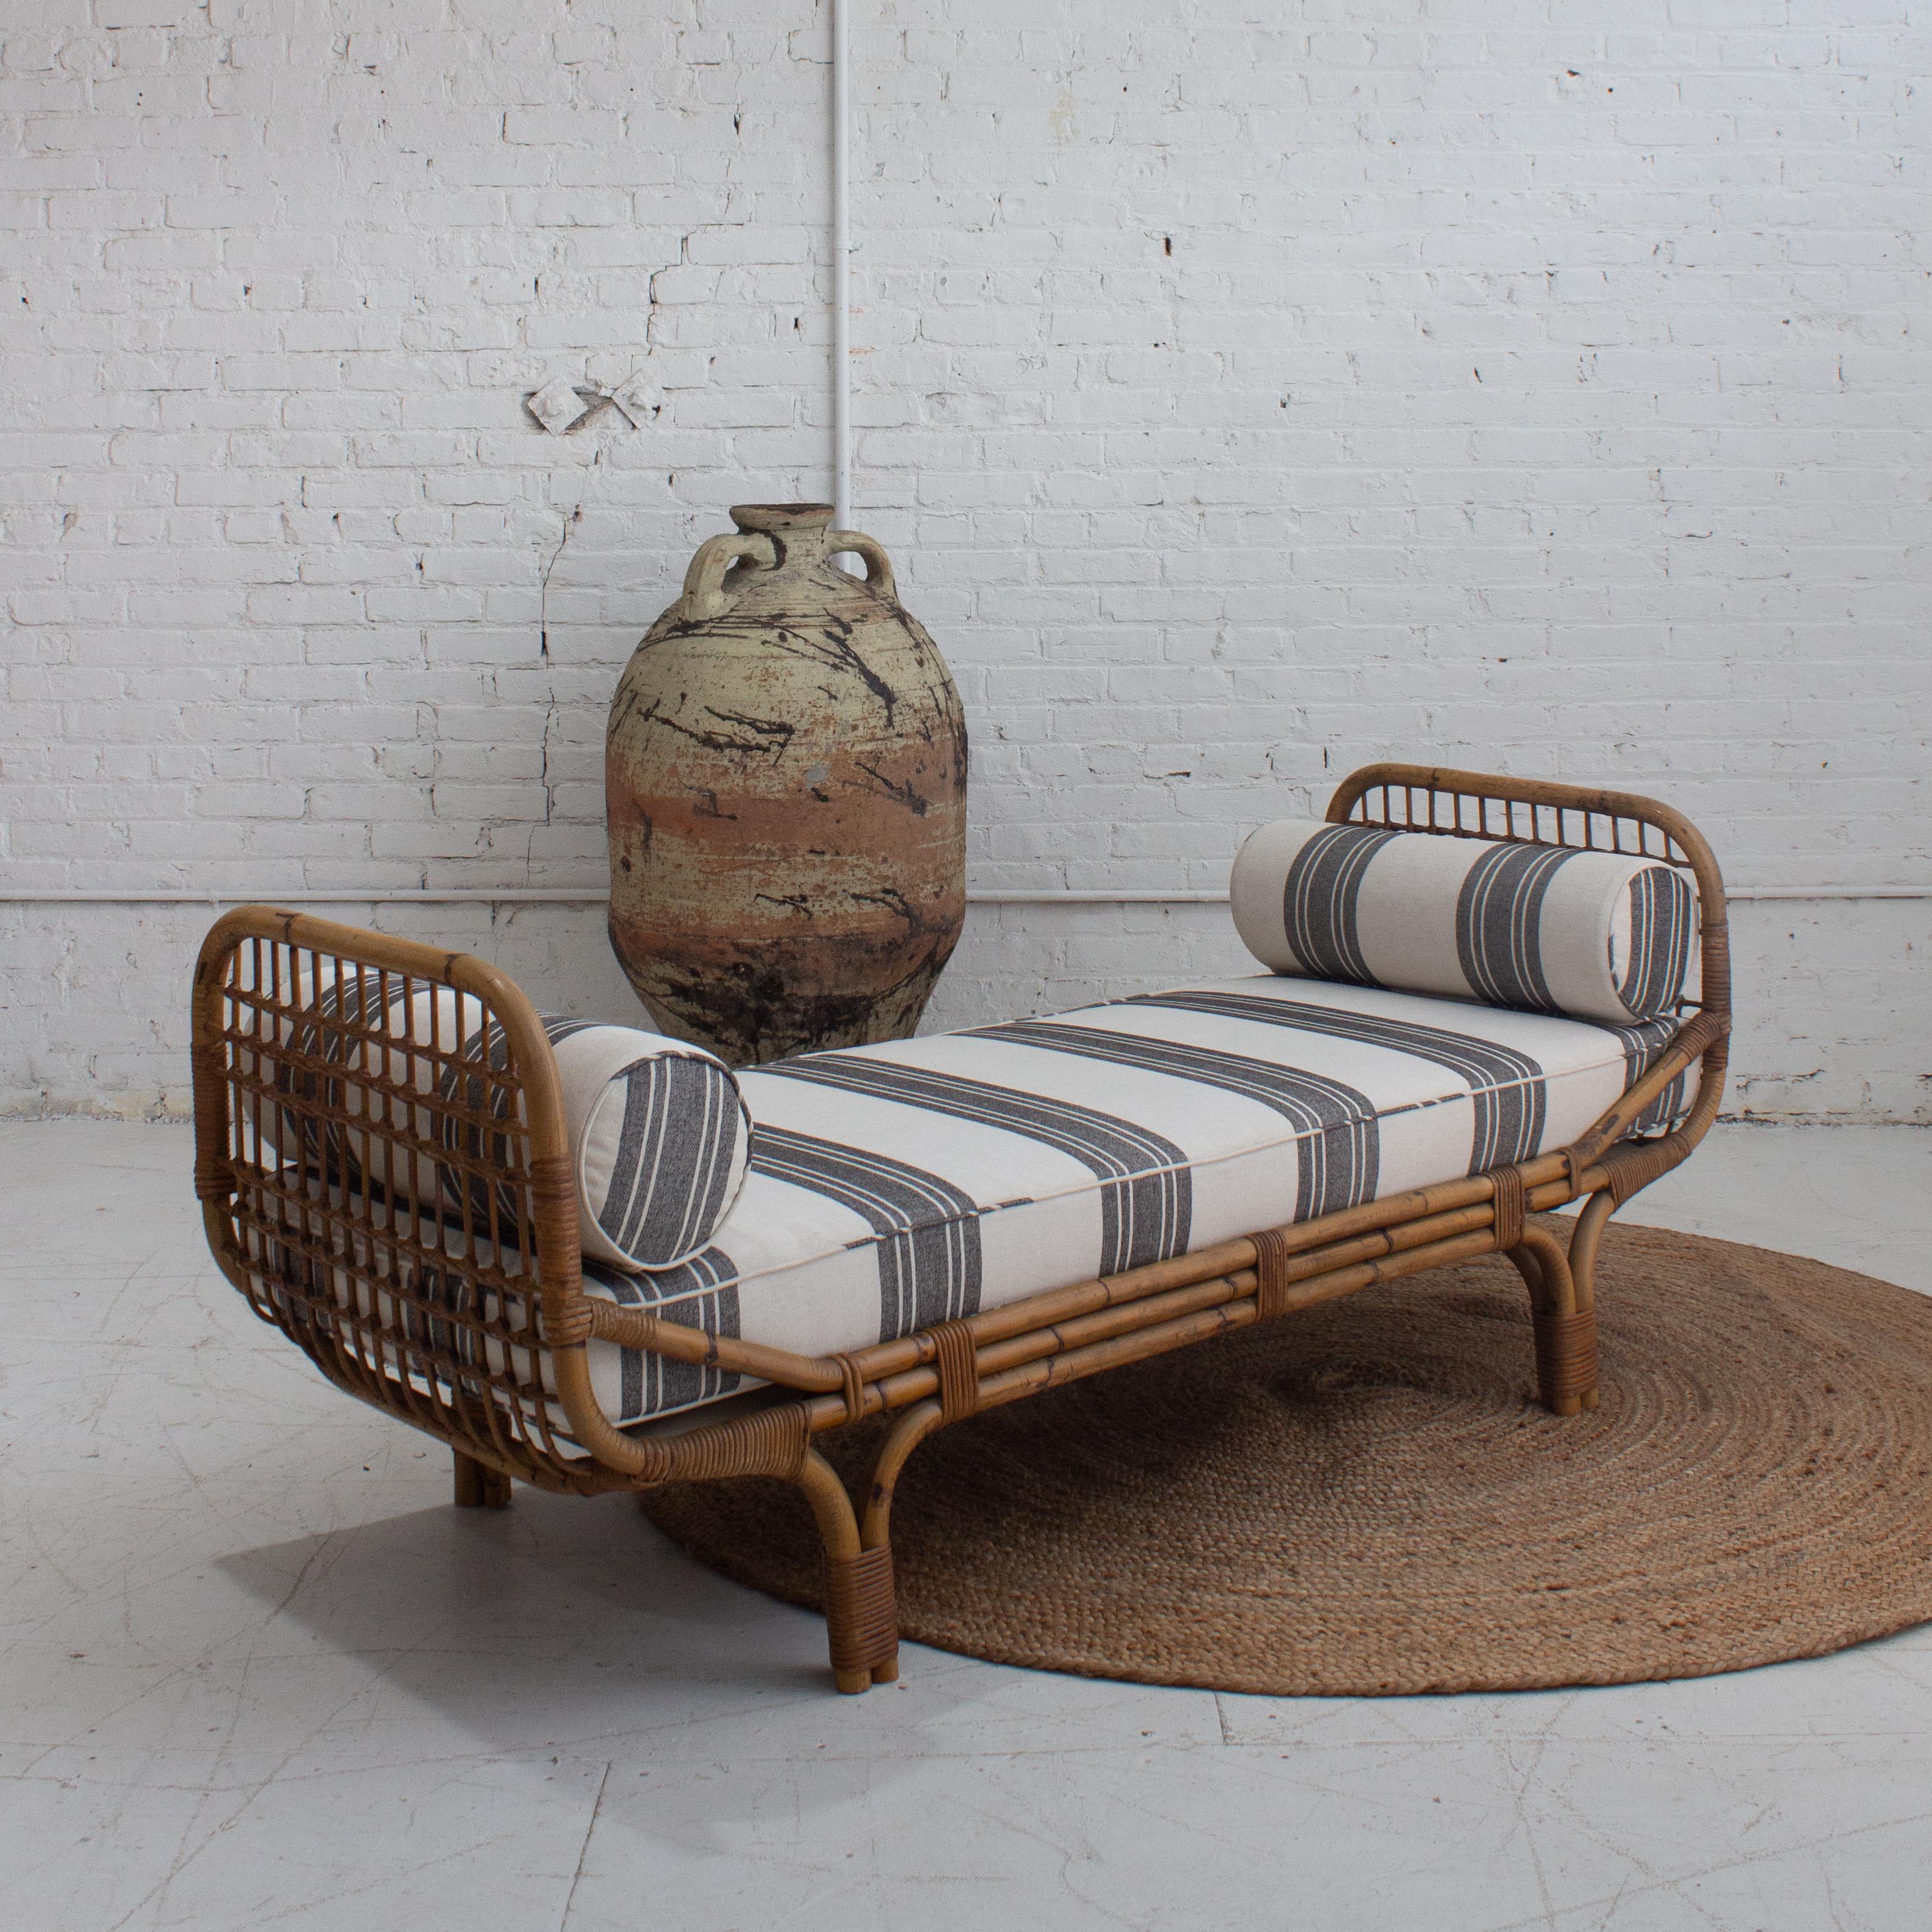 A rattan daybed by Tito Agnoli for Bonacina. Newly reupholstered in a striped linen cotton blend with new foam and bolster pillows. New base decking added for support. Sourced in Northern Italy.